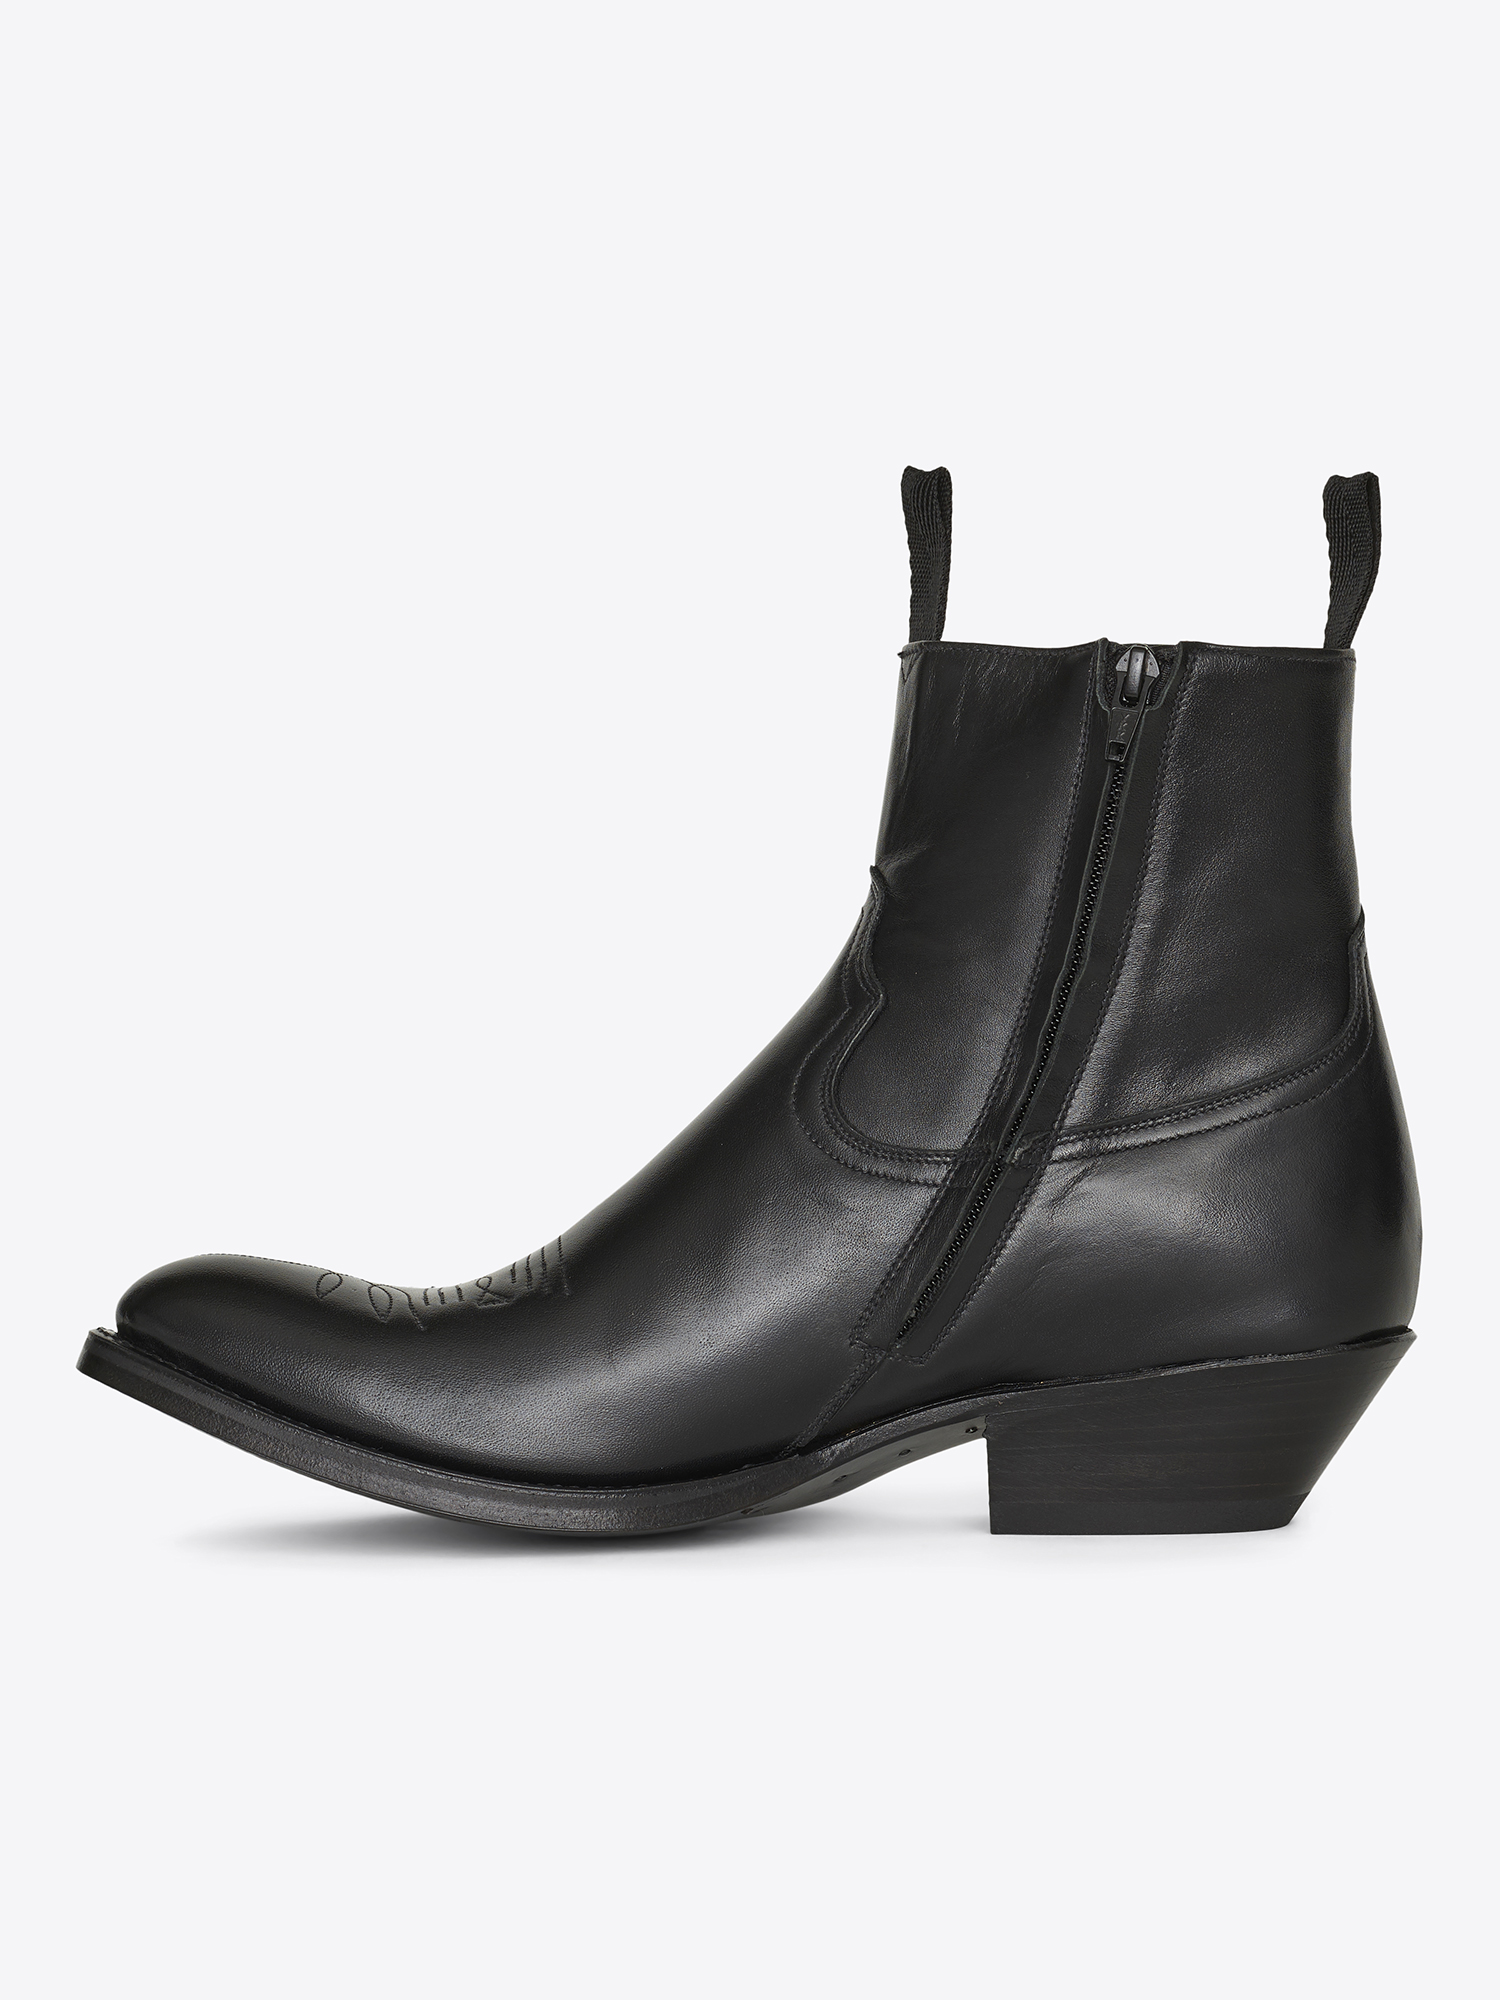 Western ankle boots in black